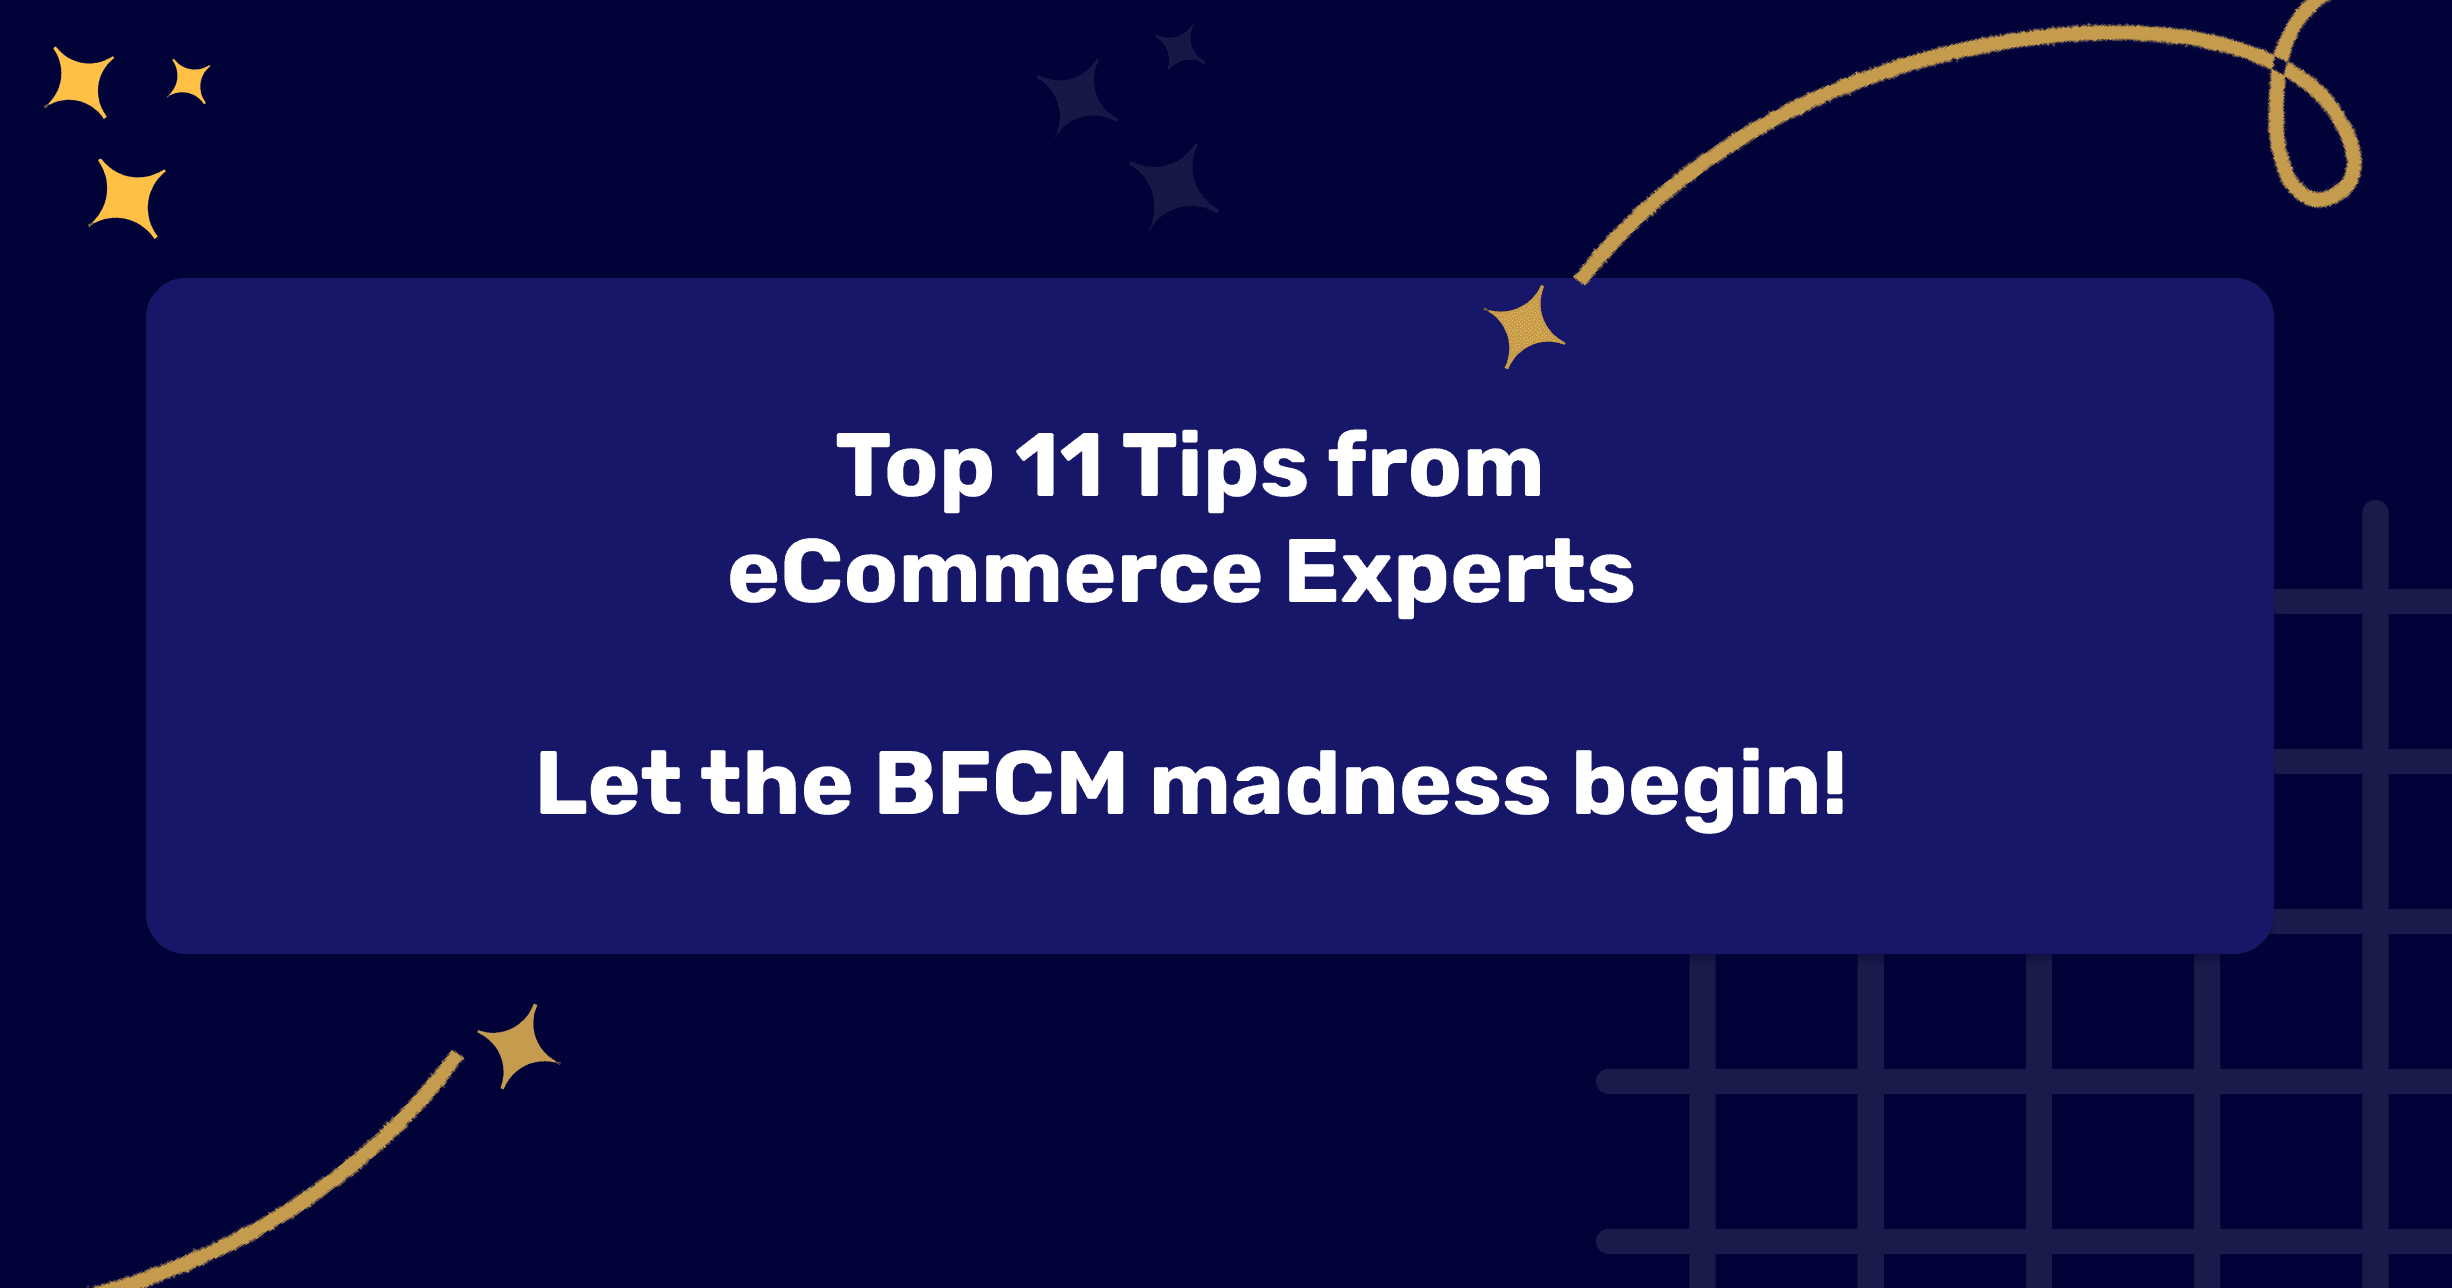 crush-bfcm-2021-with-powerful-strategies-from-ecommerce-experts